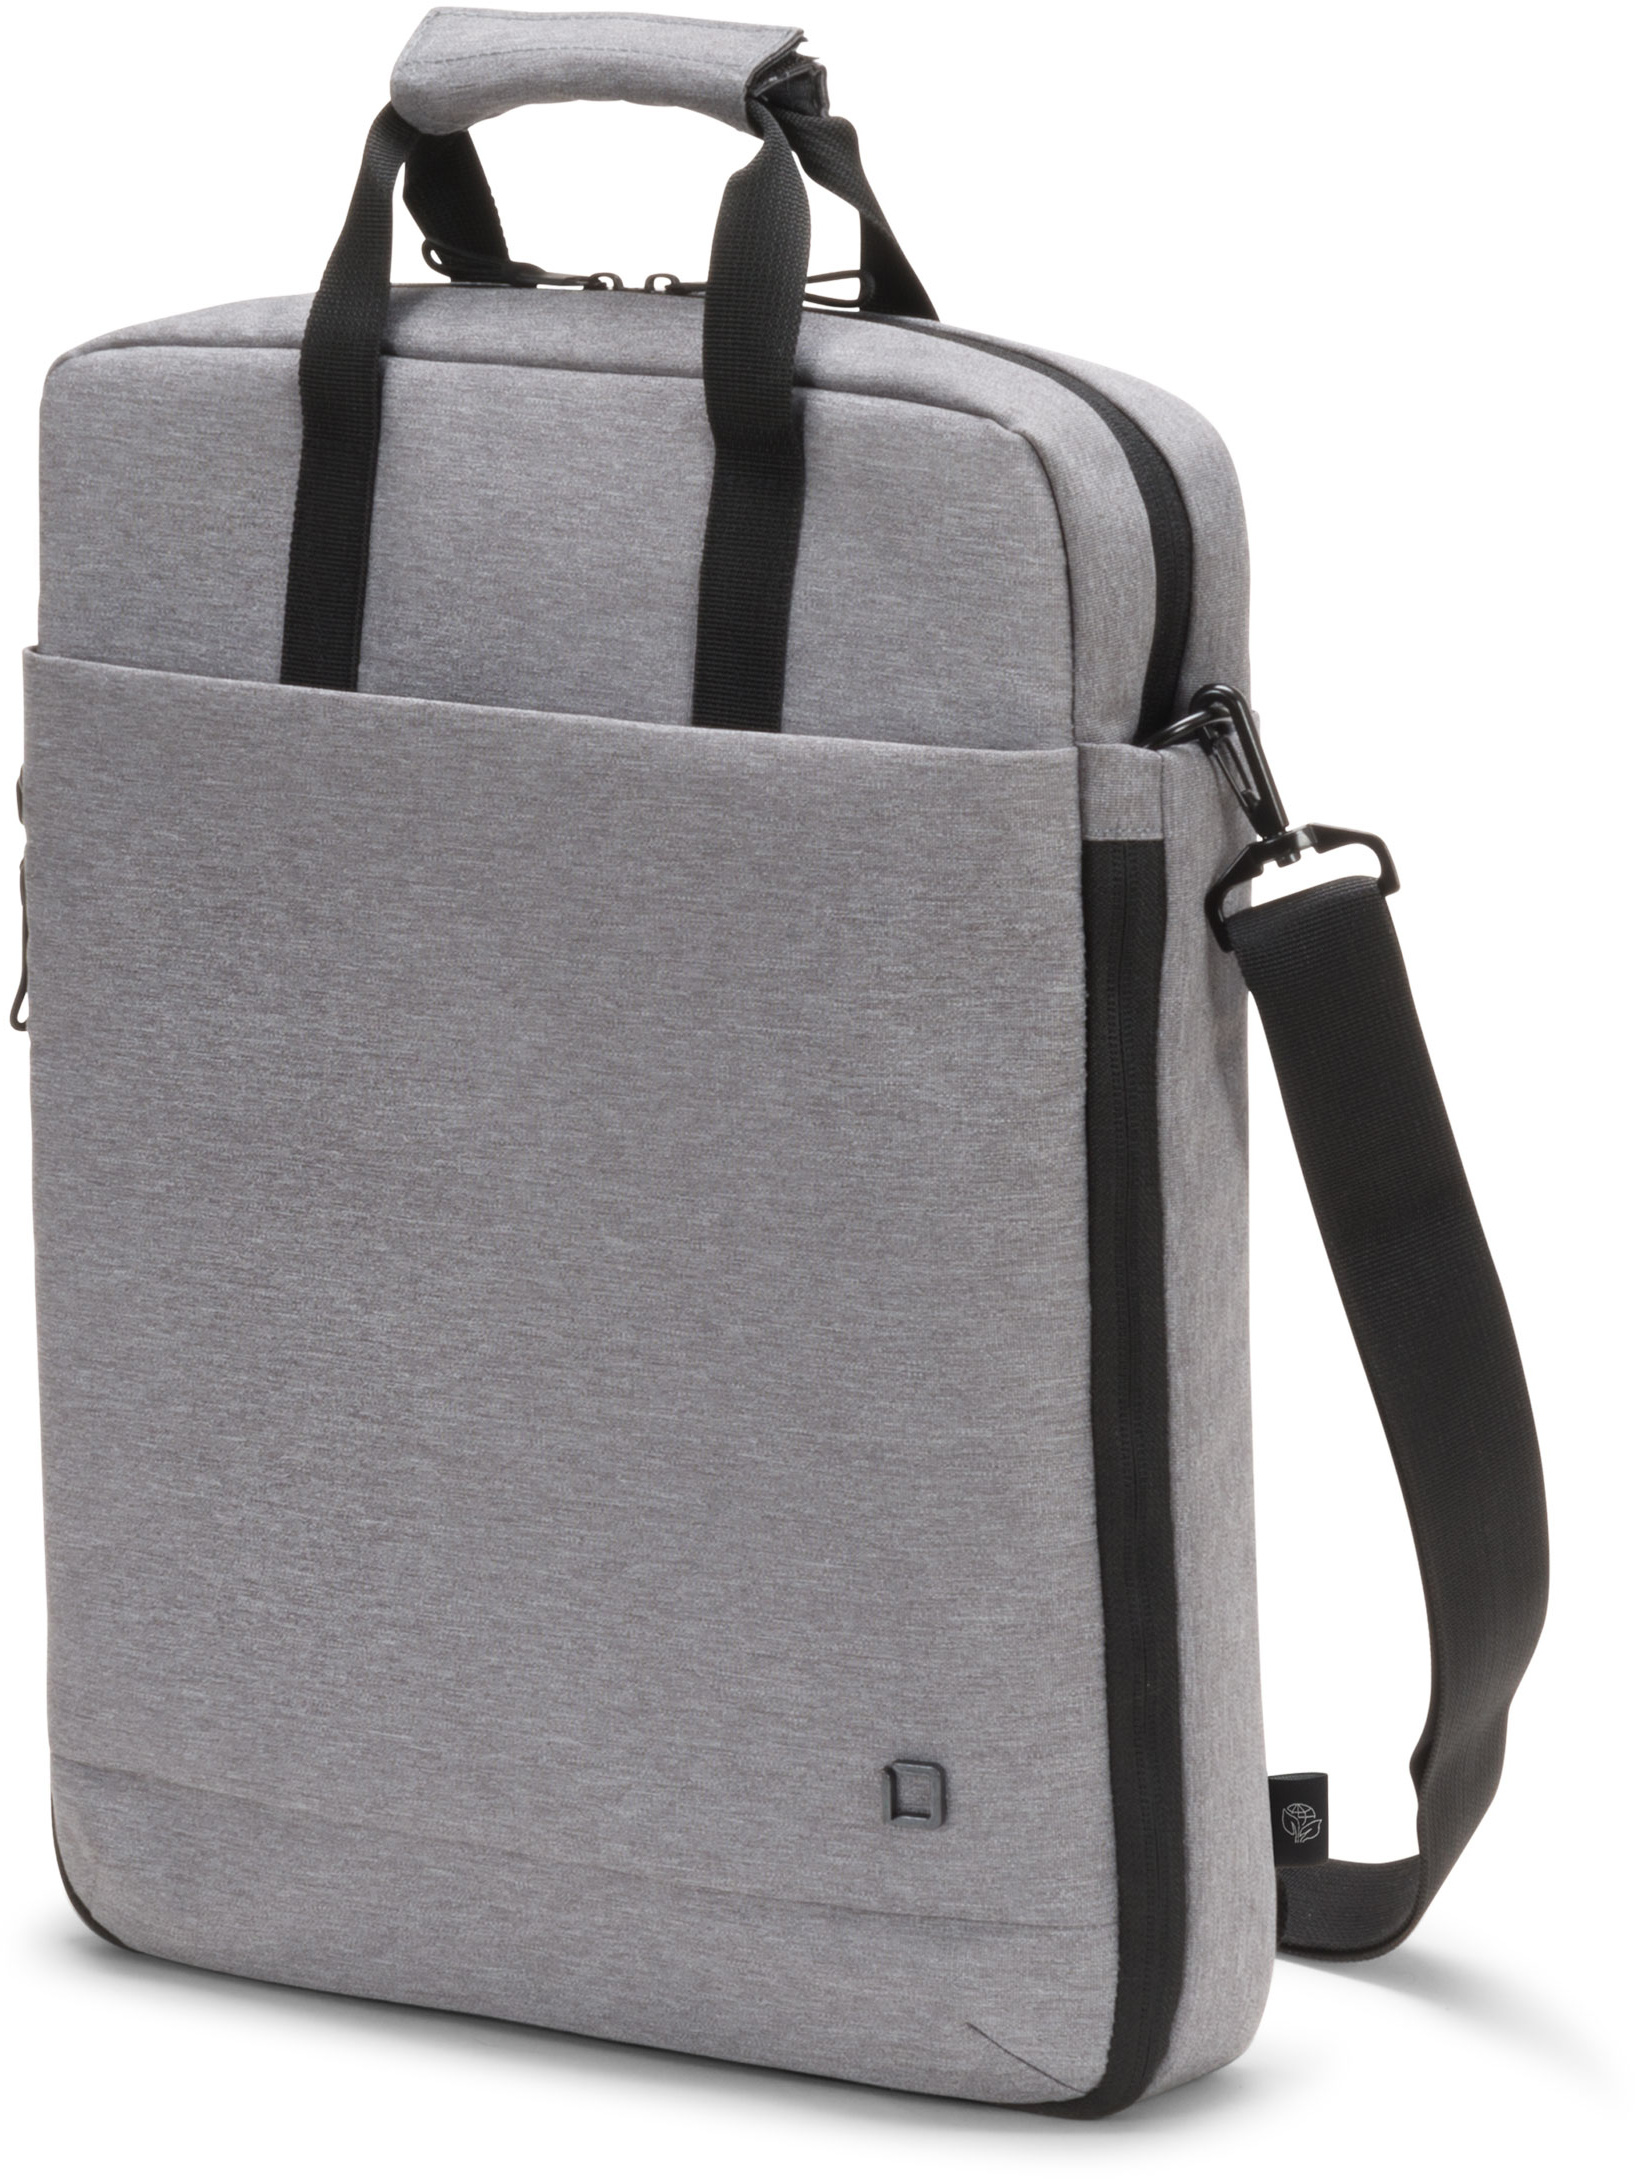 DICOTA Eco Tote Bag MOTION lgt Grey D31879-RPET for Universal 13 -15.6 inch